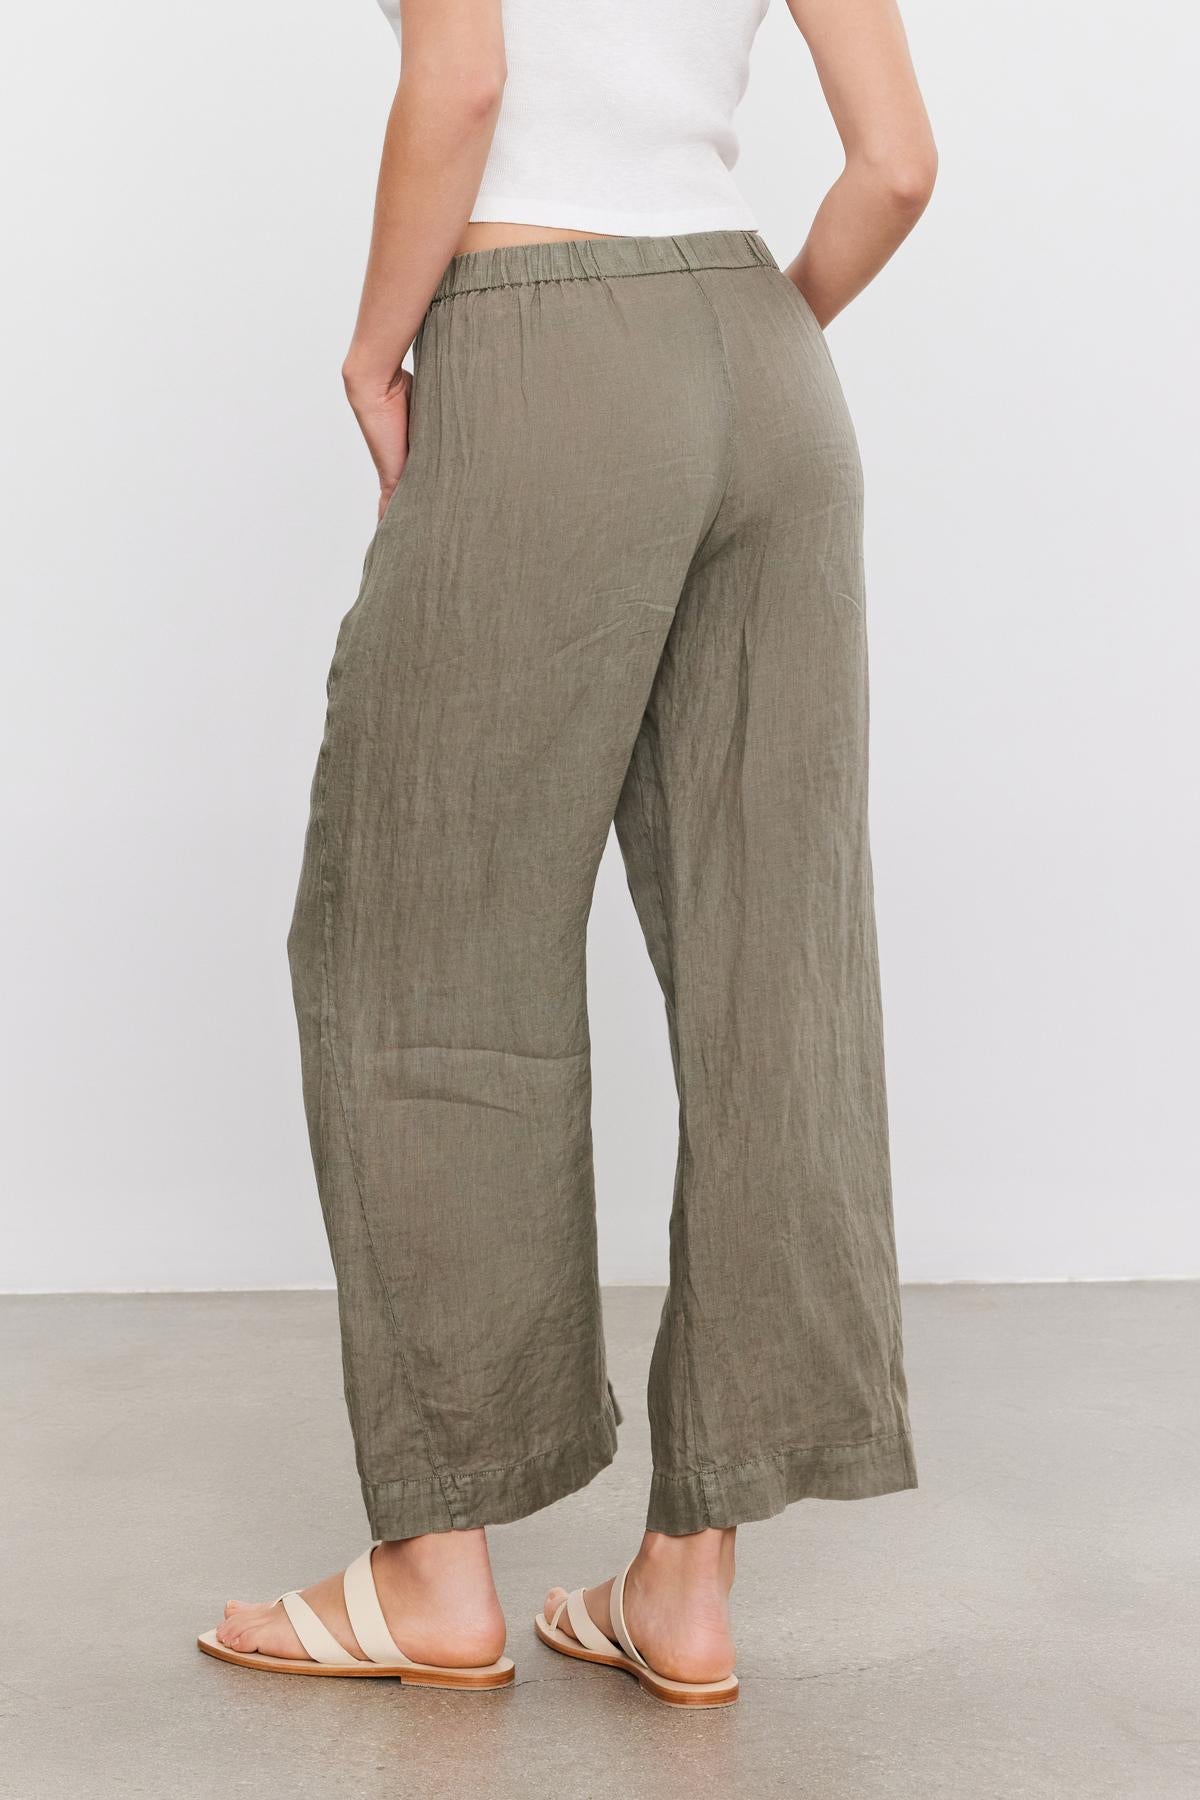   Rear view of a person wearing loose-fitting, lightweight LOLA LINEN PANT by Velvet by Graham & Spencer in olive green, a white top, and beige sandals, standing against a plain white background. 